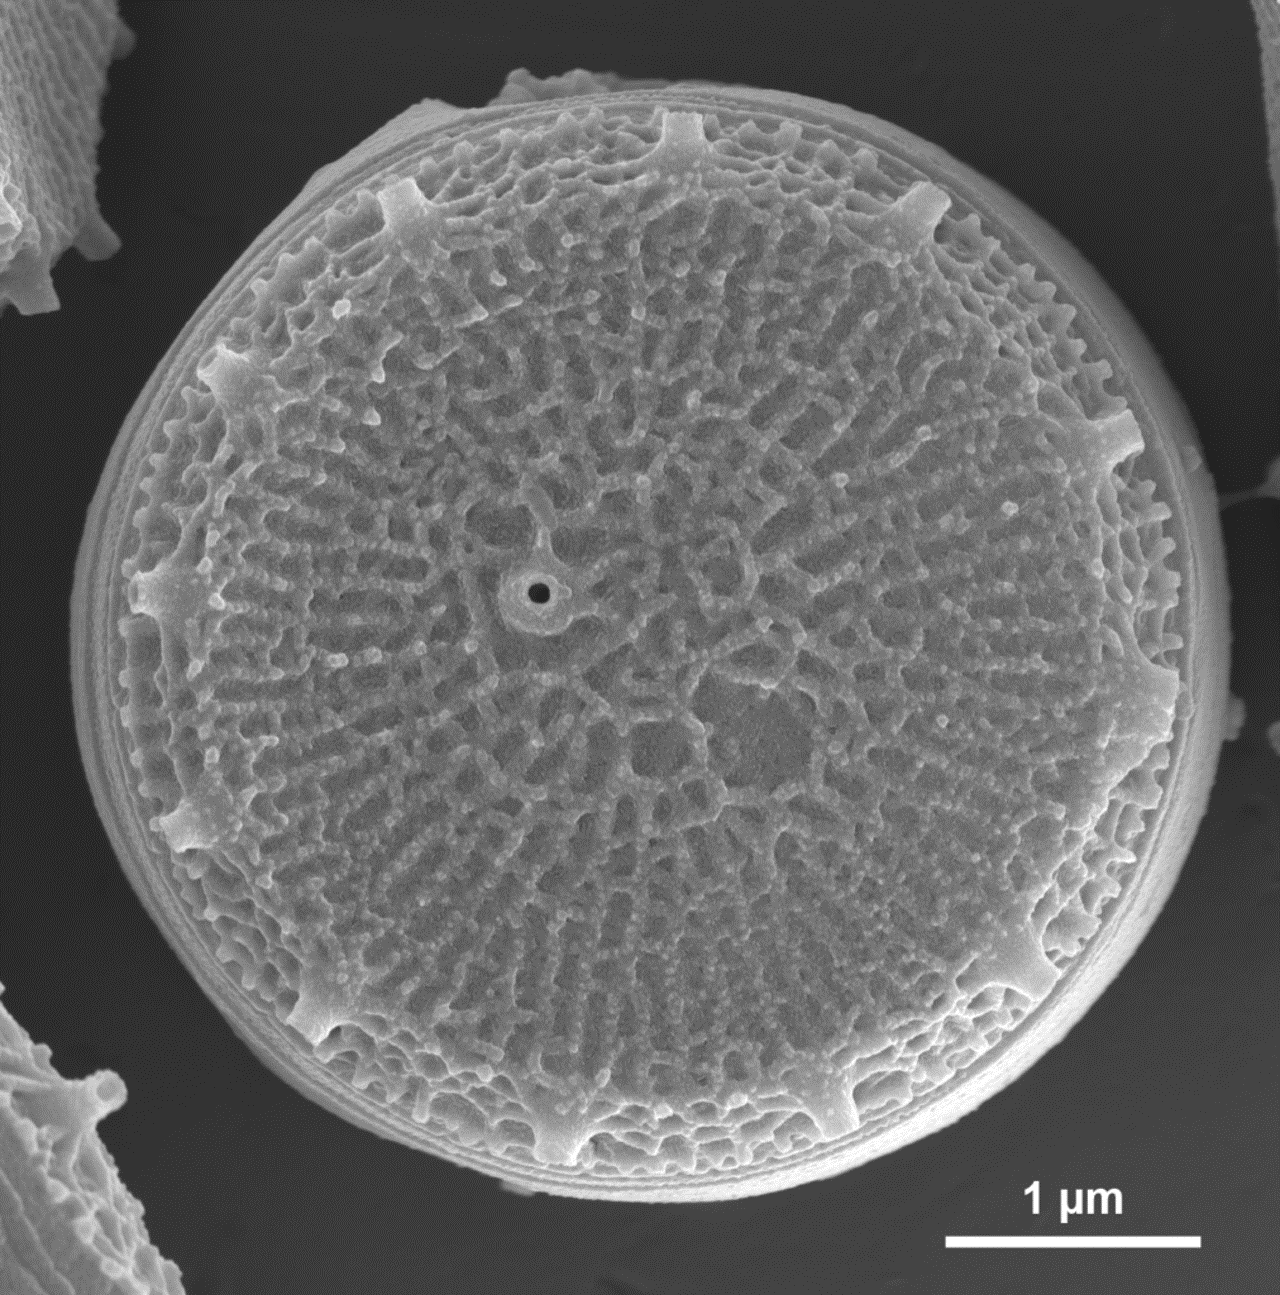 Image of a diatom captured with scanning electron microscopy using ZEISS Crossbeam